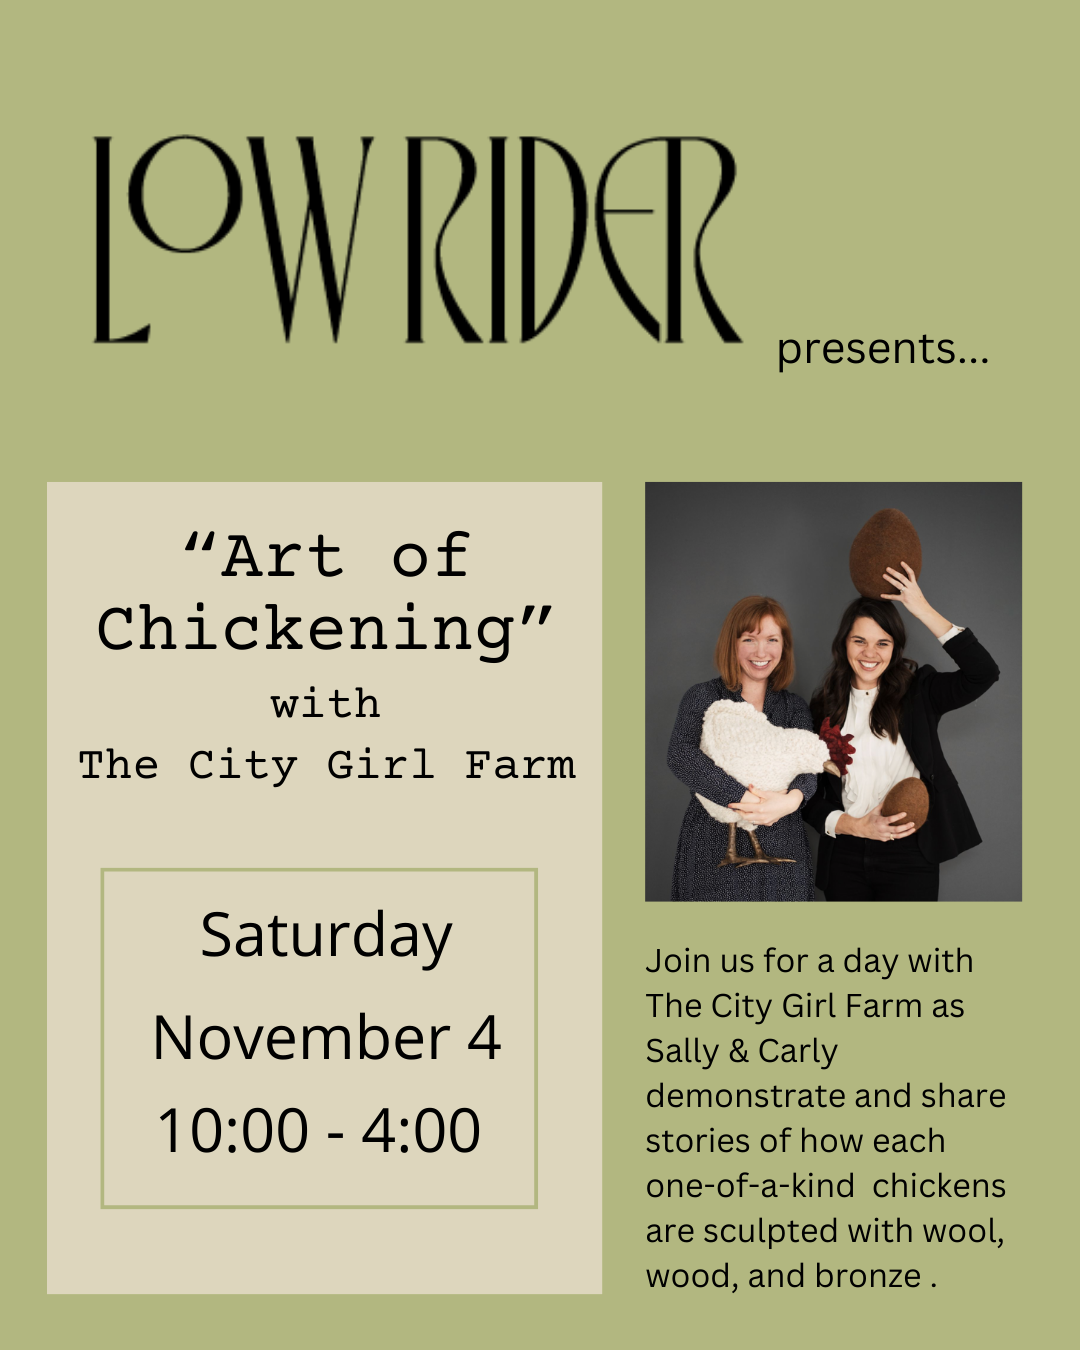 "Art of Chickening" with The City Girl Farm